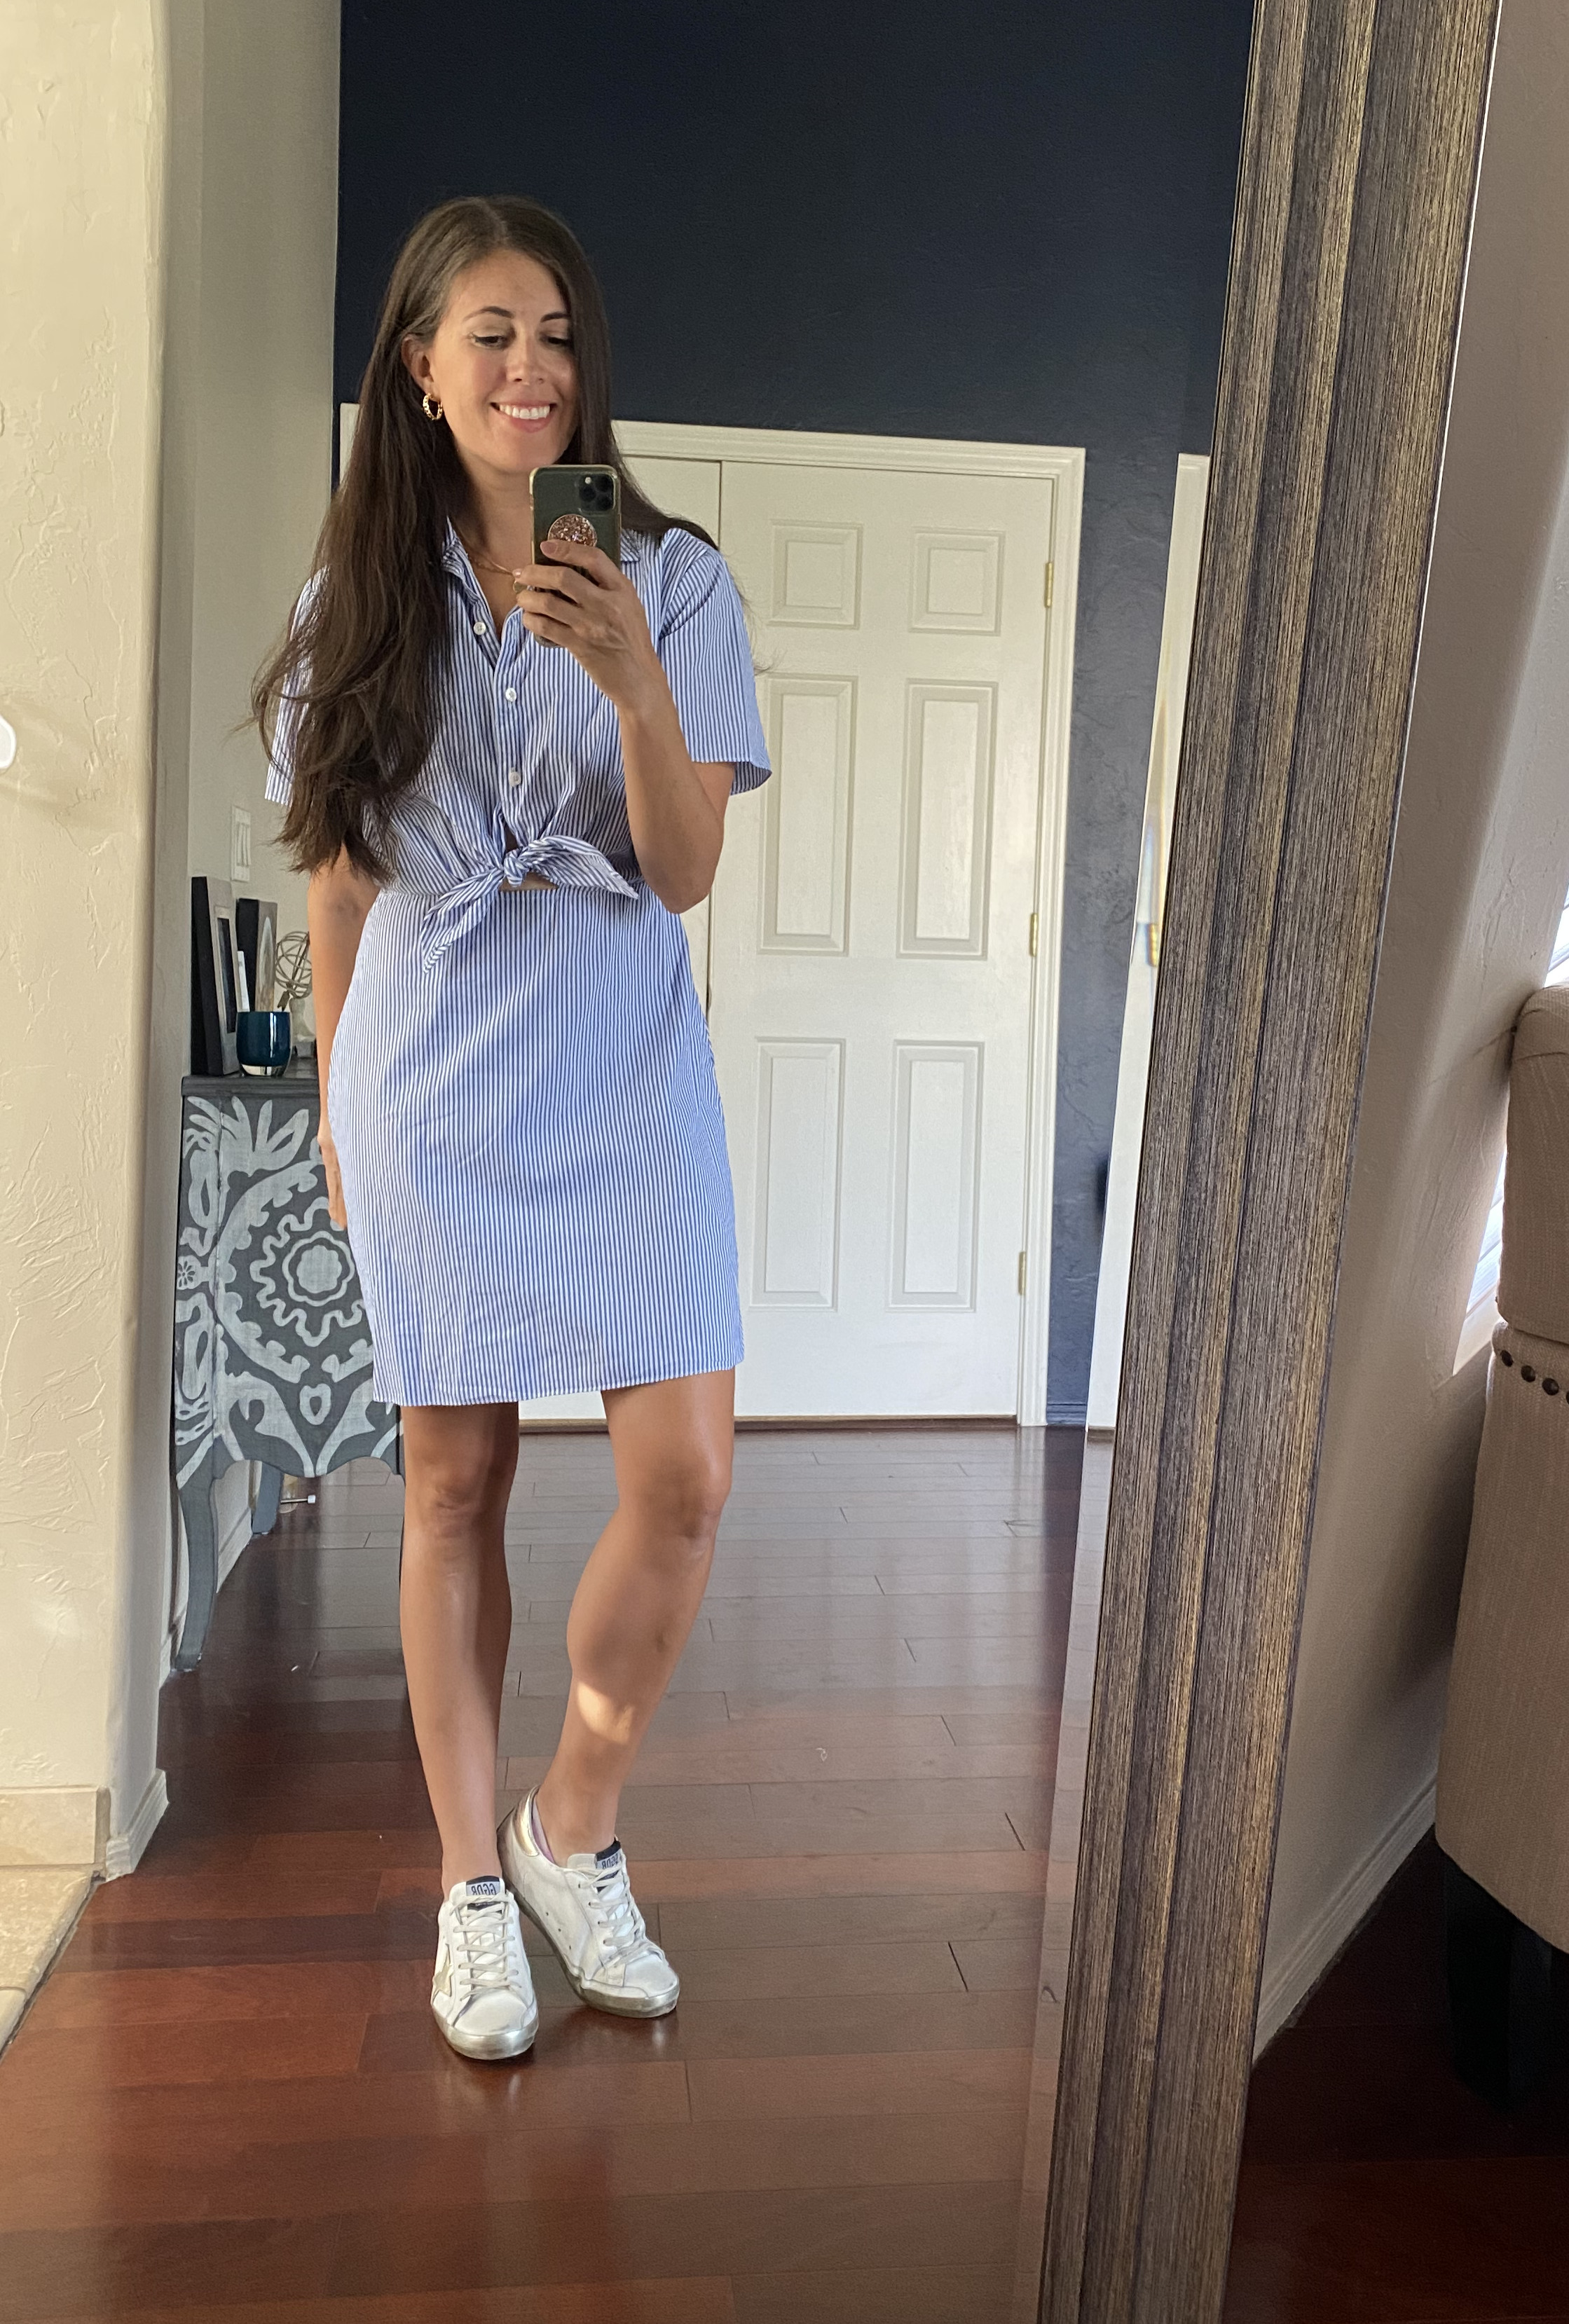 shirtdress 1 - Friday Faves - The Fitnessista